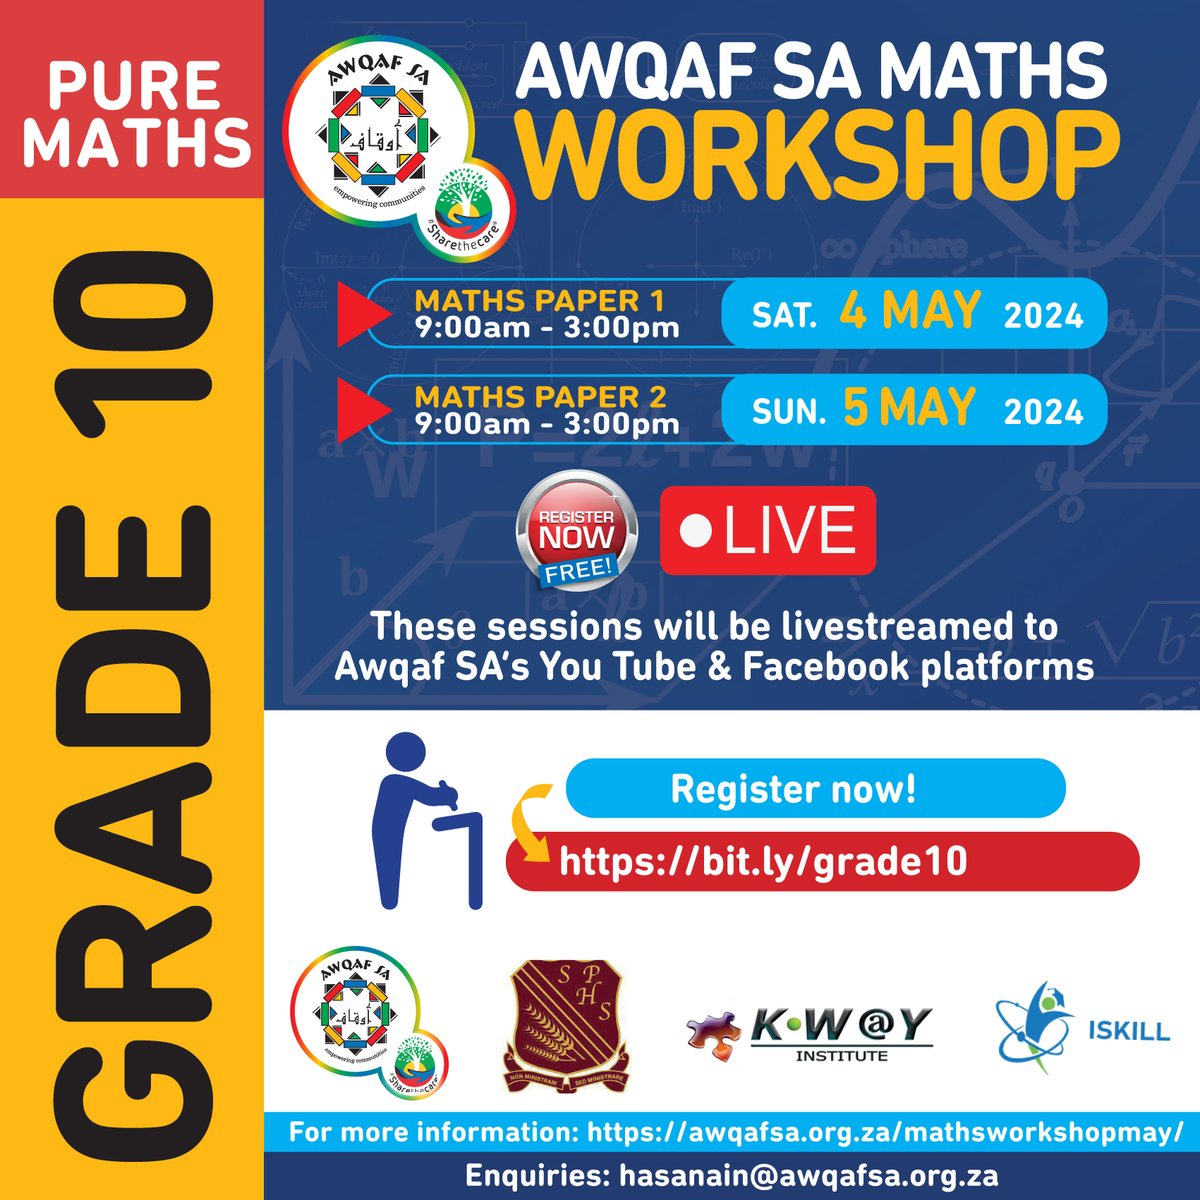 Ace your Grade 10 maths exam by attending Awqaf SA Maths Revision Workshop. Saturday, 4 May 2024, 9:00am - 3:00pm Free, online registration is essential: bit.ly/grade10may